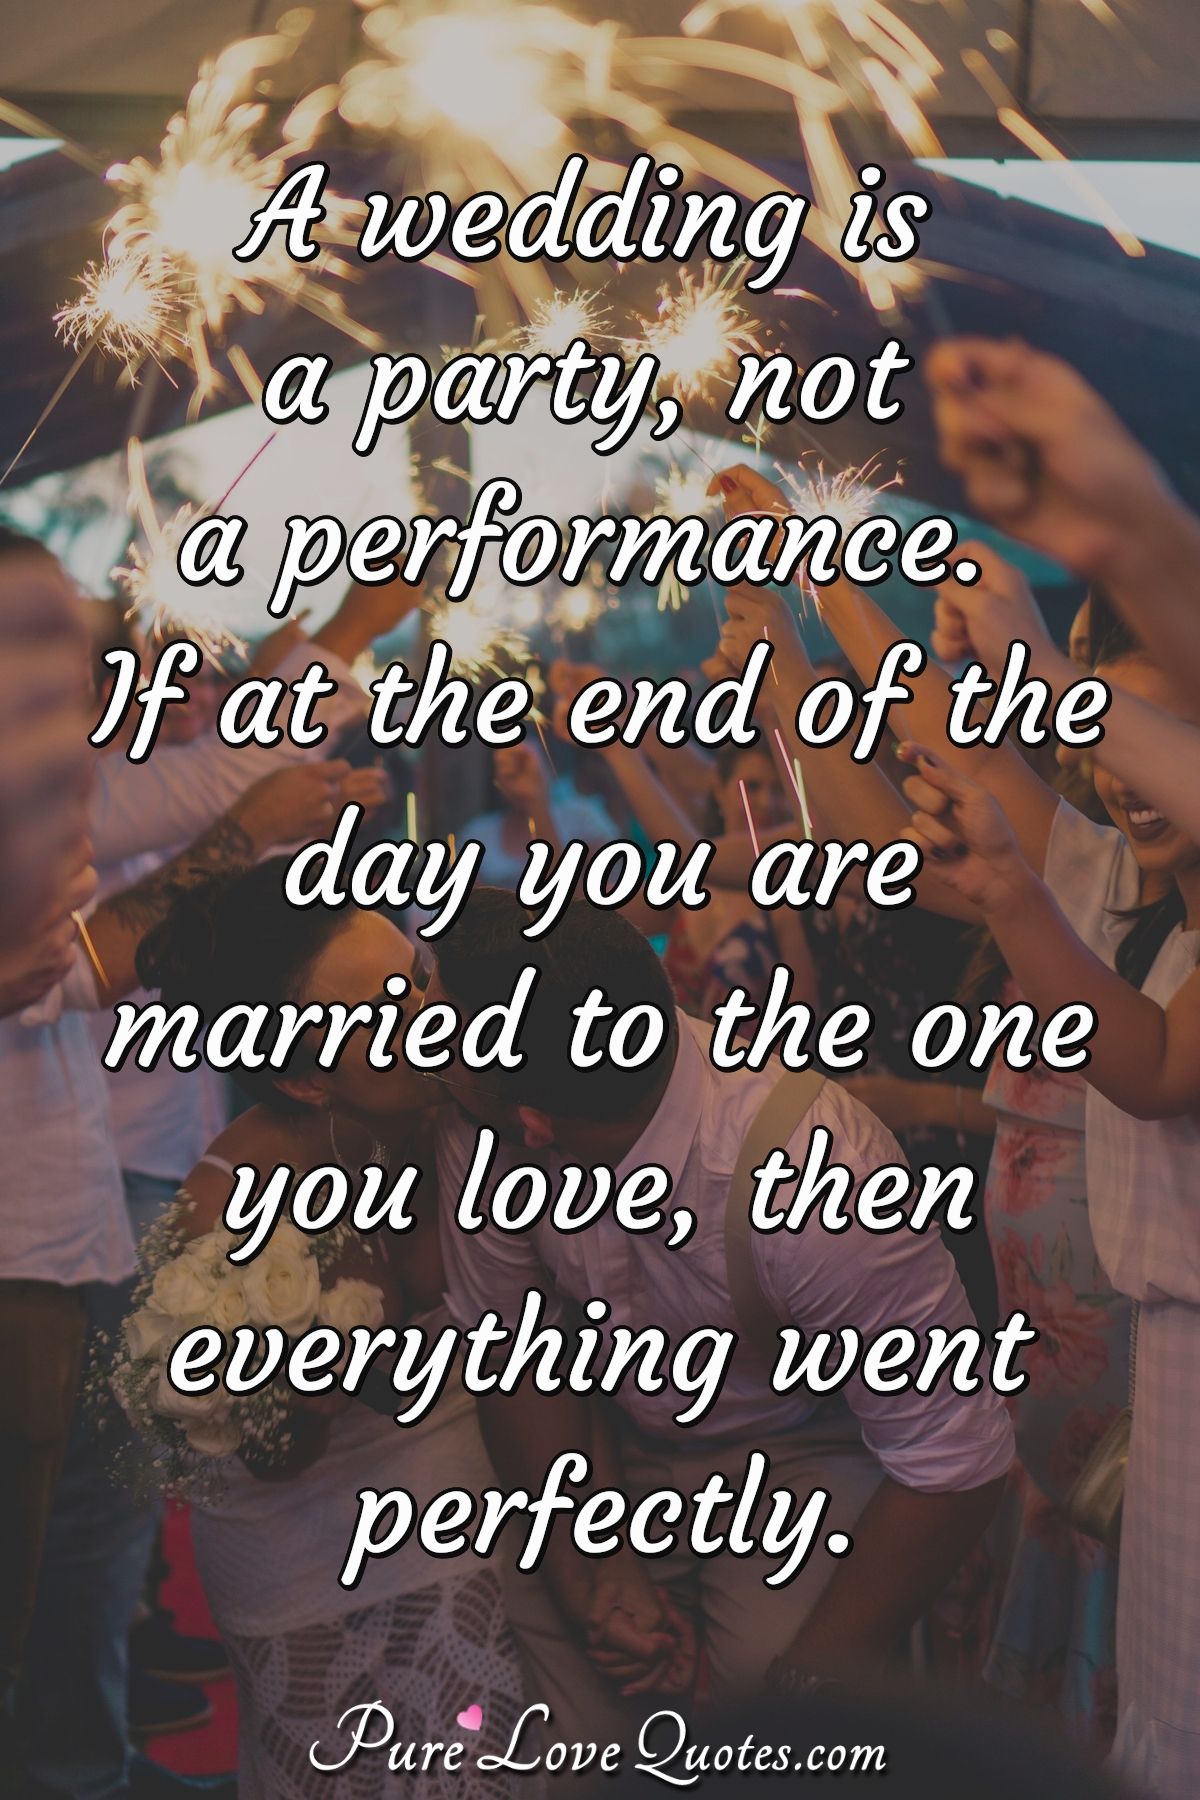 A wedding is a party, not a performance. If at the end of the day you are married to the one you love, then everything went perfectly. - Anonymous